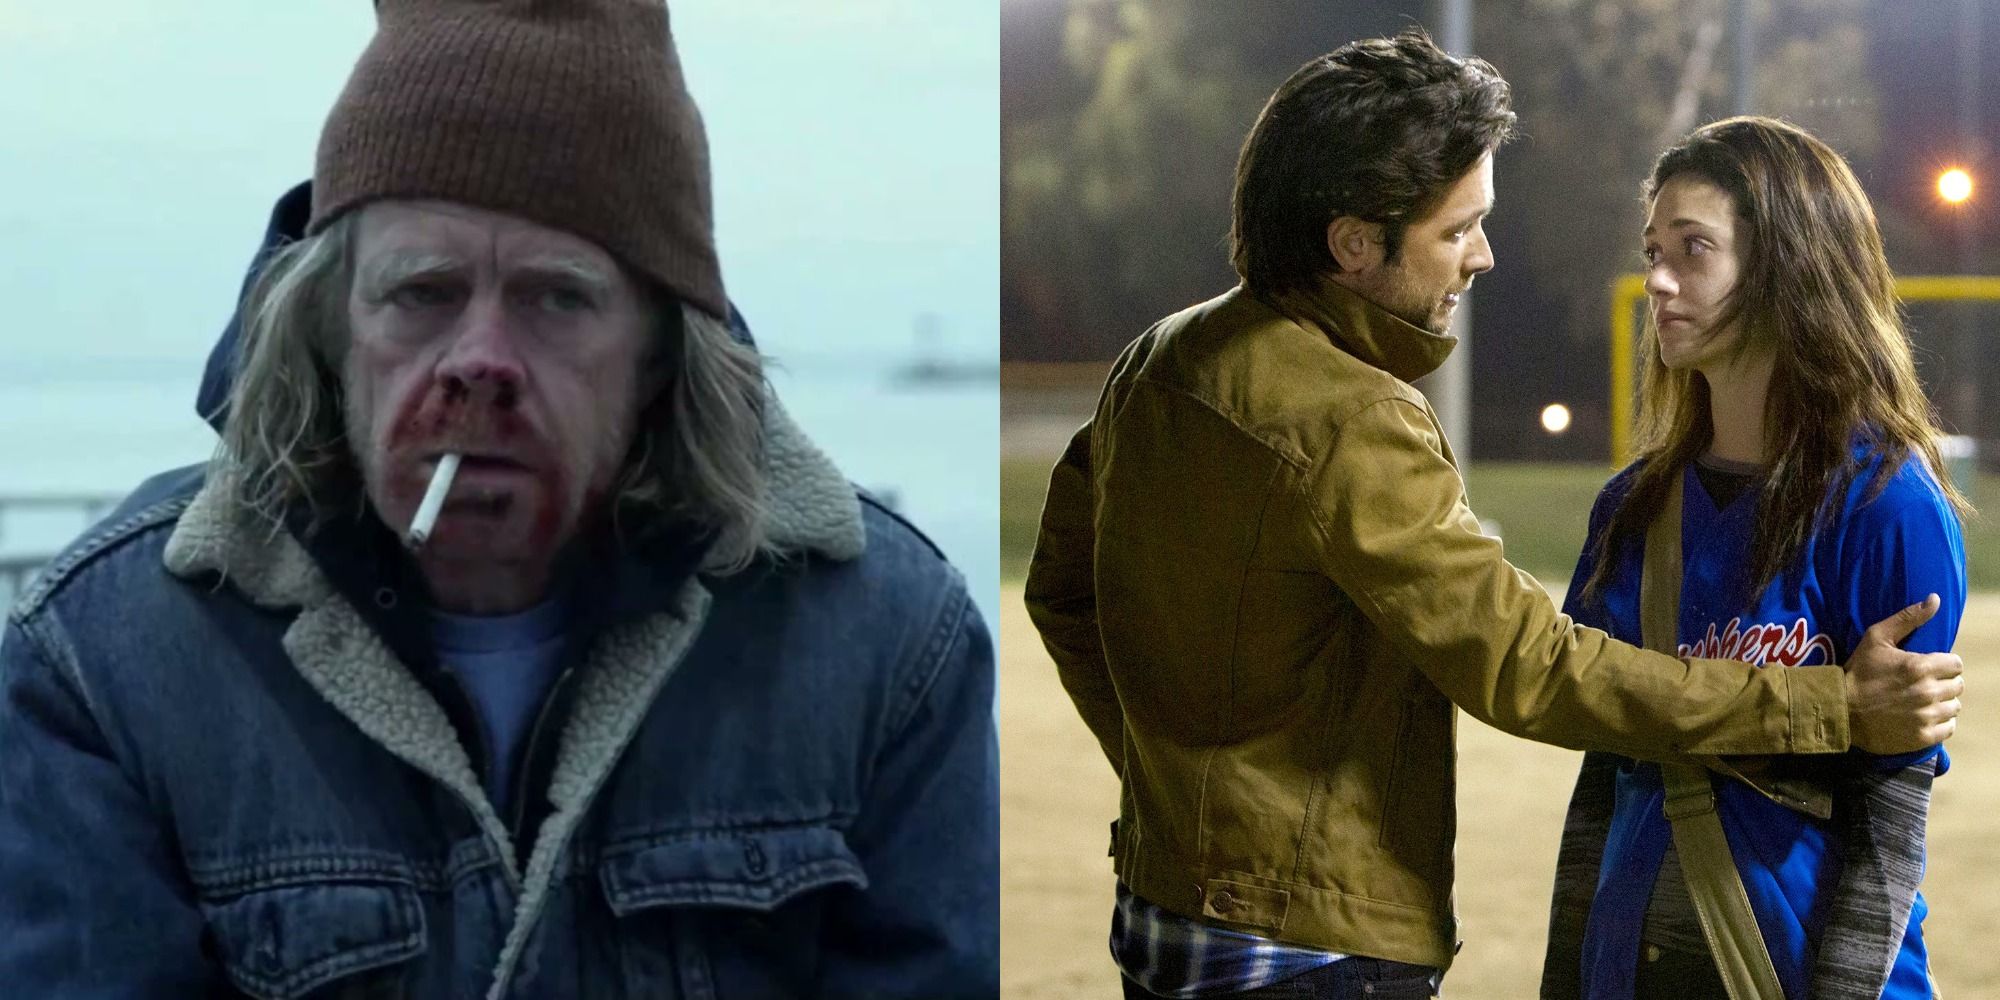 Shameless: Frank Gallagher / Fiona and Jimmy